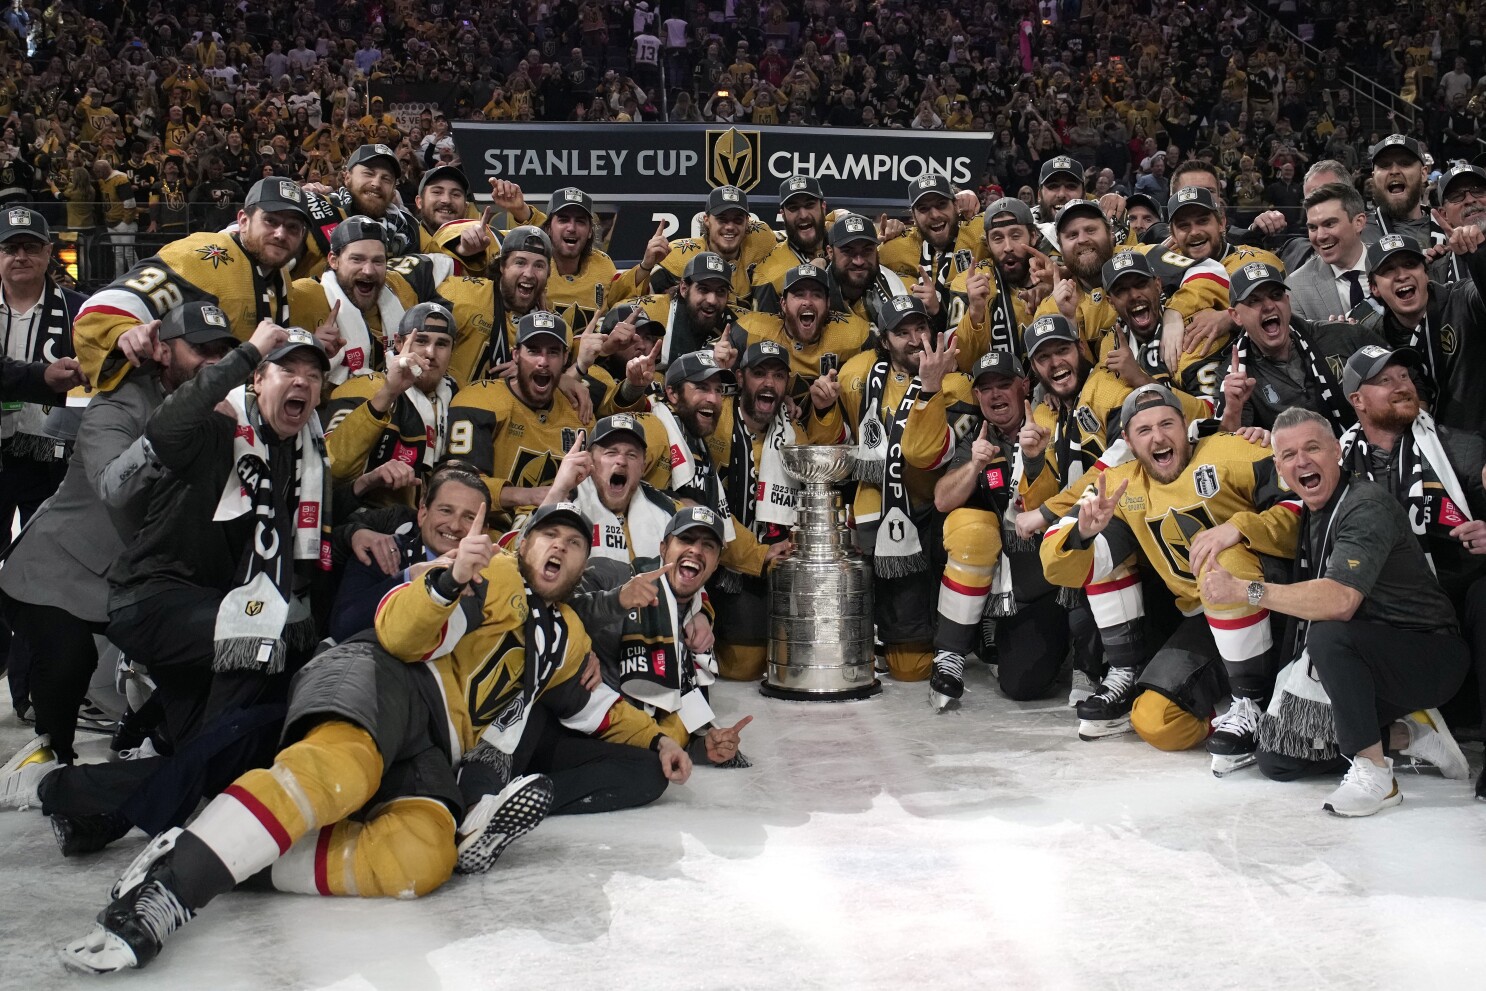 Pittsburgh Penguins' third jersey has a championship look